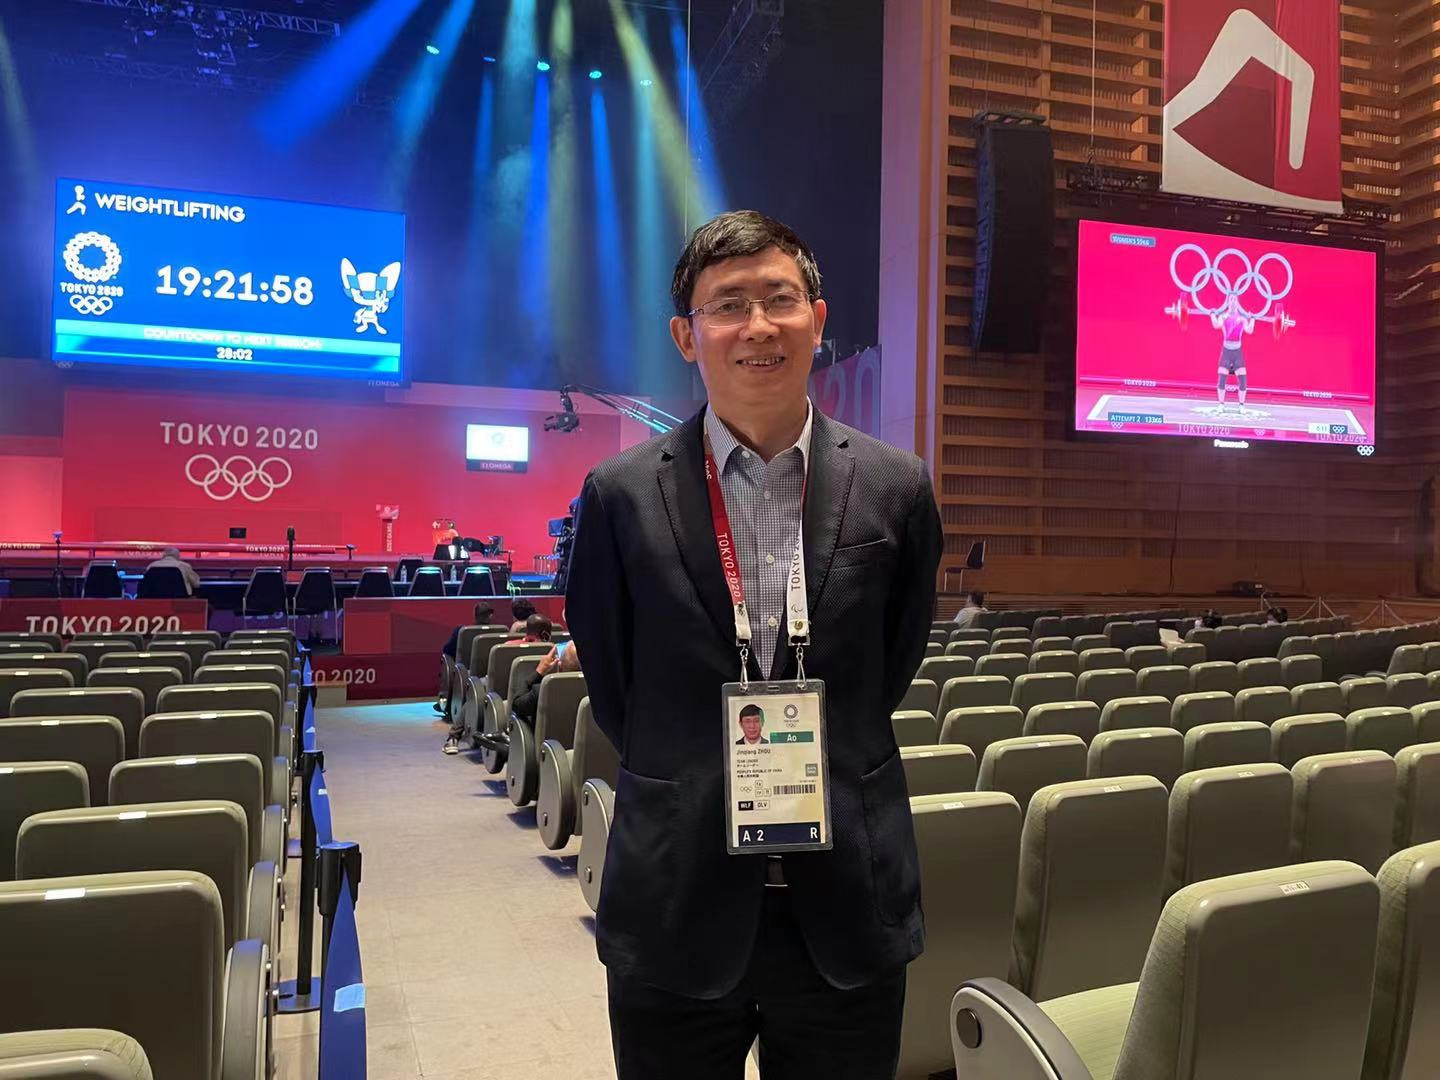 Chinese Weightlifting Association President Zhou Jinqiang said he was "deeply moved" by his team's quest for Olympic medals ©CWA